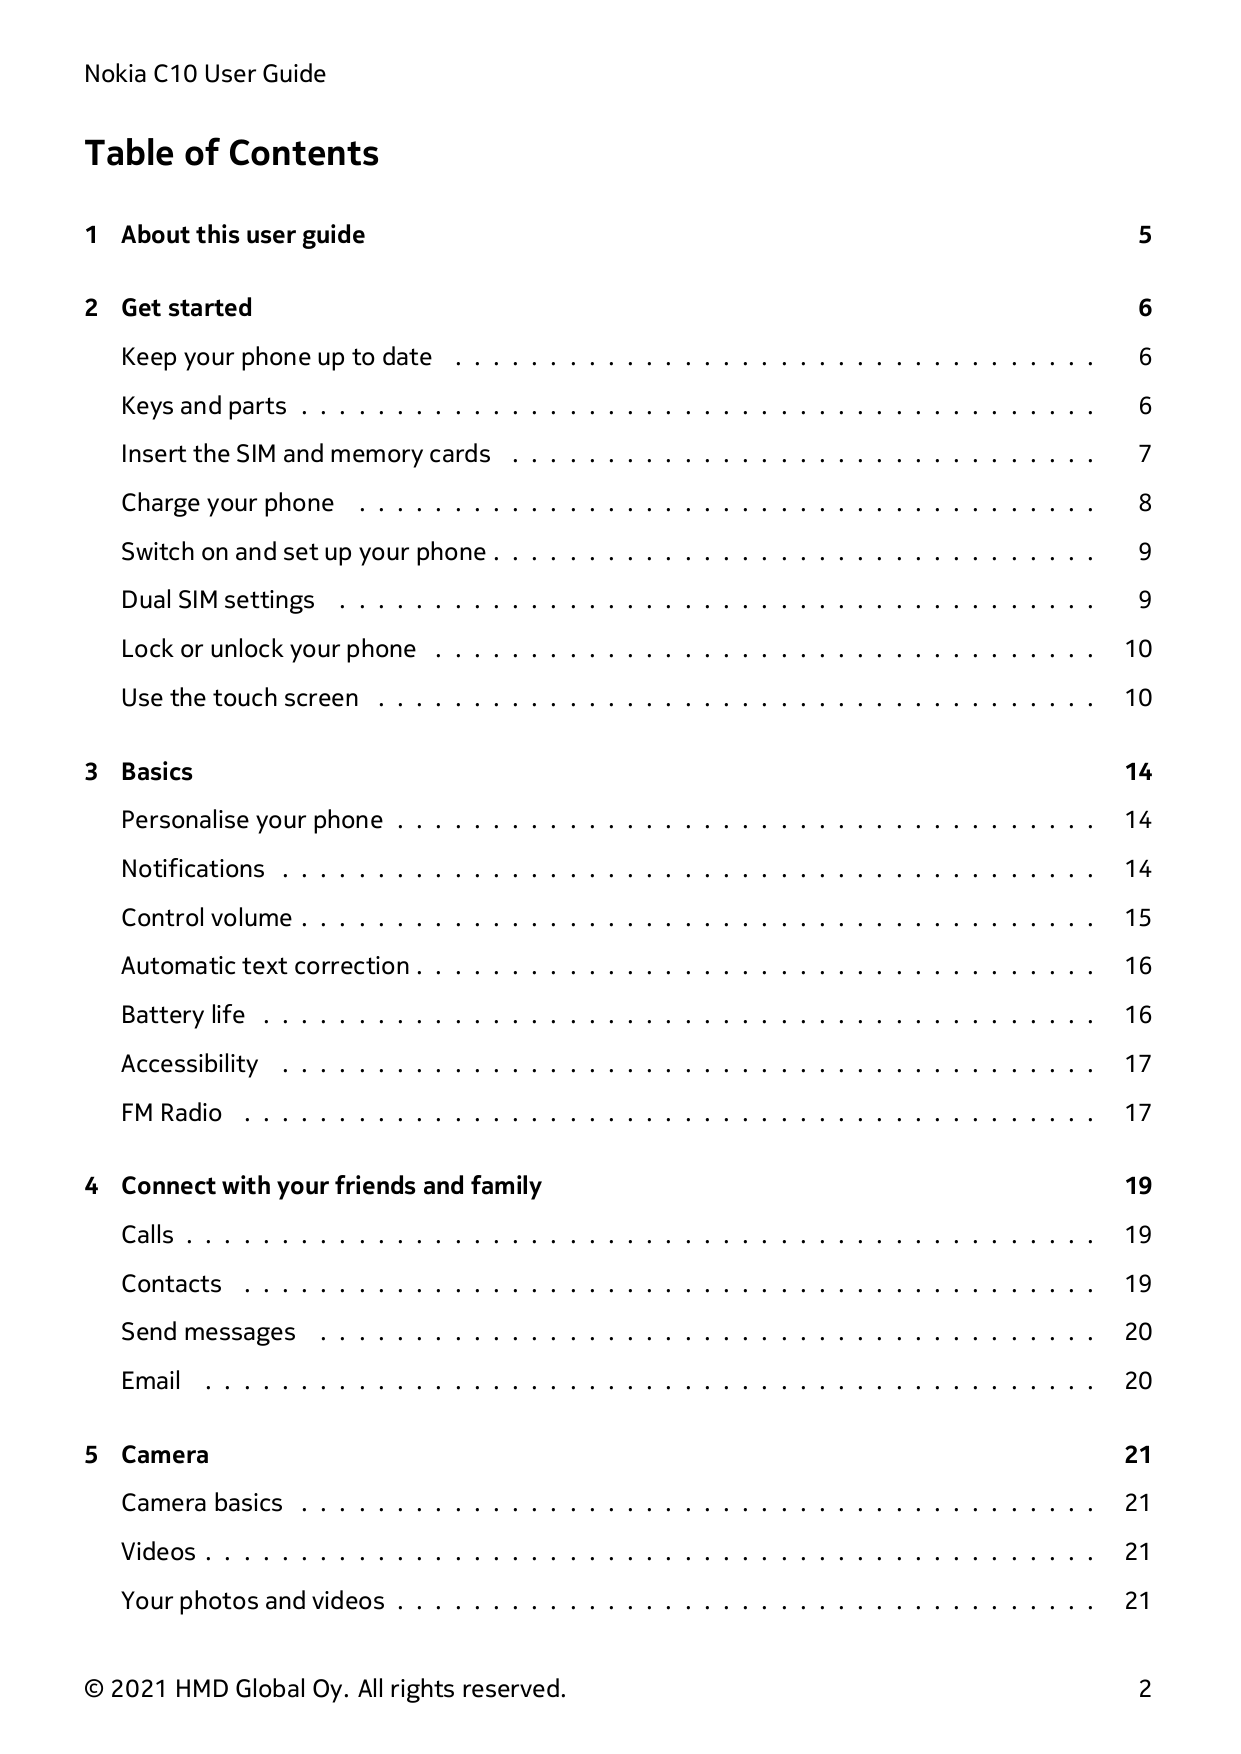 Nokia C10 User GuideTable of Contents1 About this user guide52 Get started6Keep your phone up to date . . . . . . . . . . . . . 